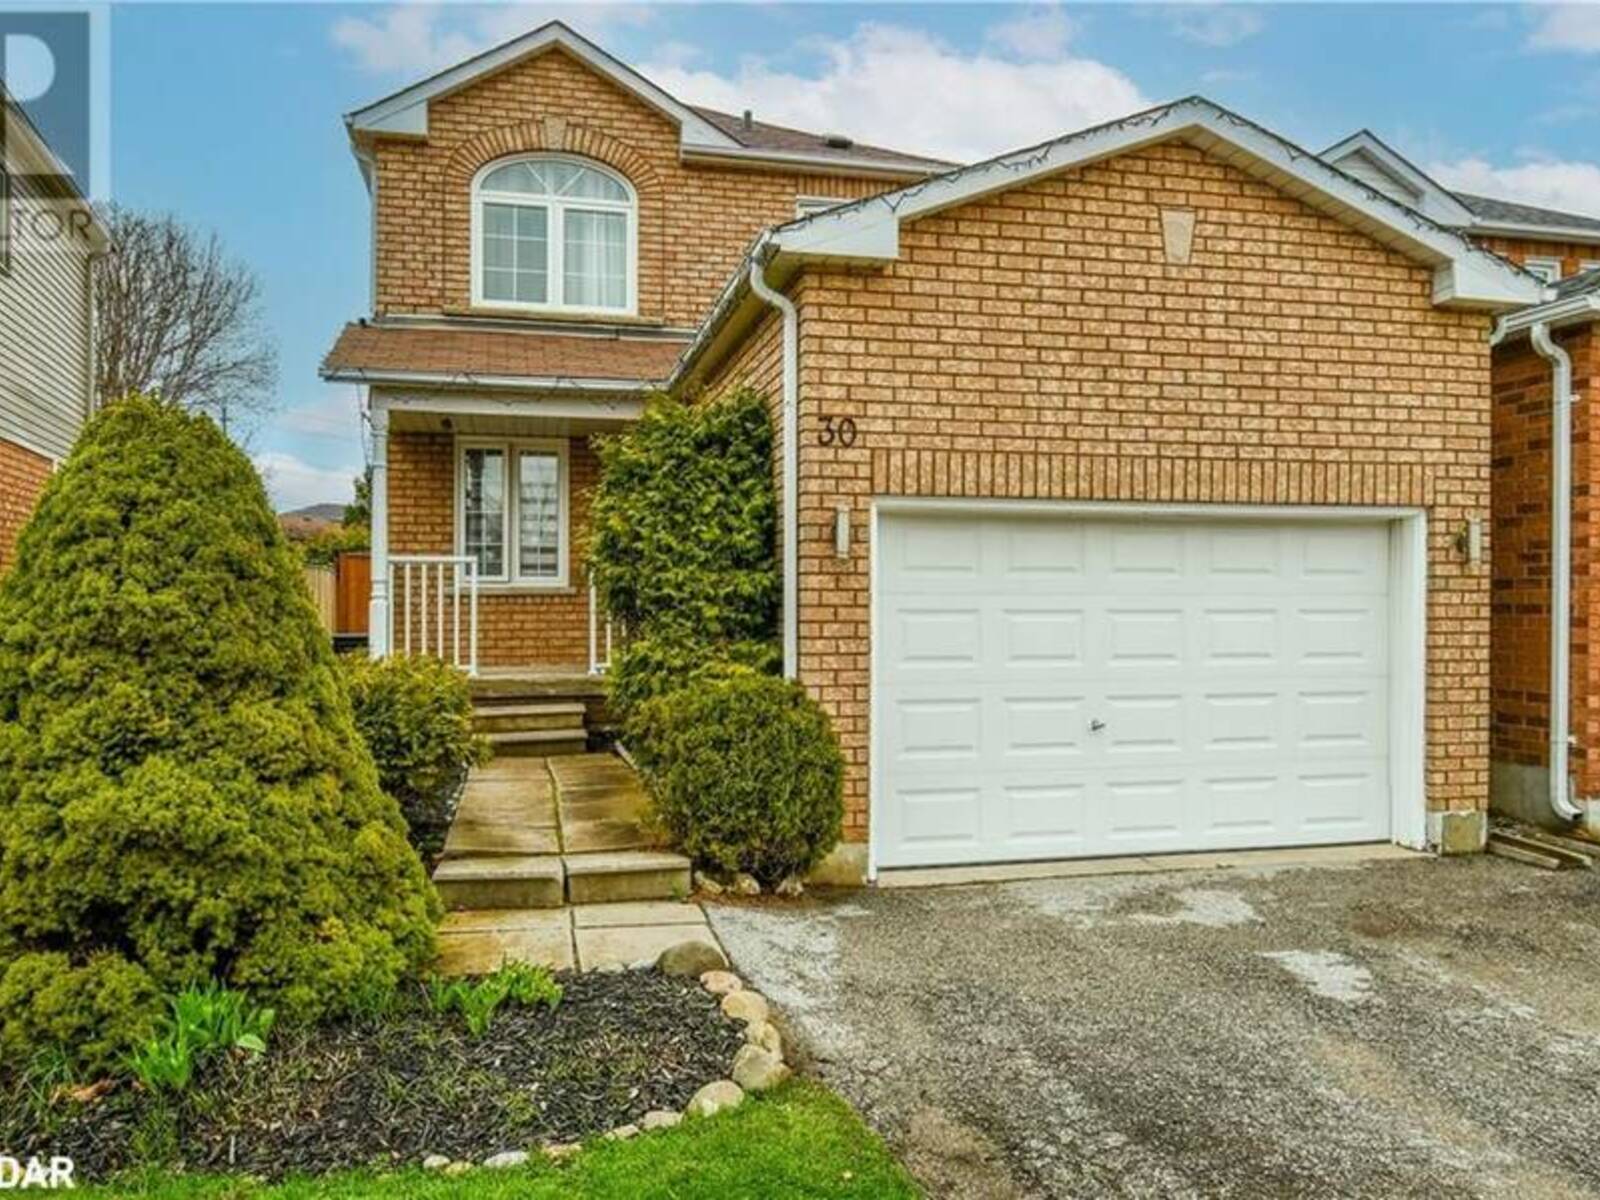 30 AIKENS Crescent, Barrie, Ontario L4N 8M6